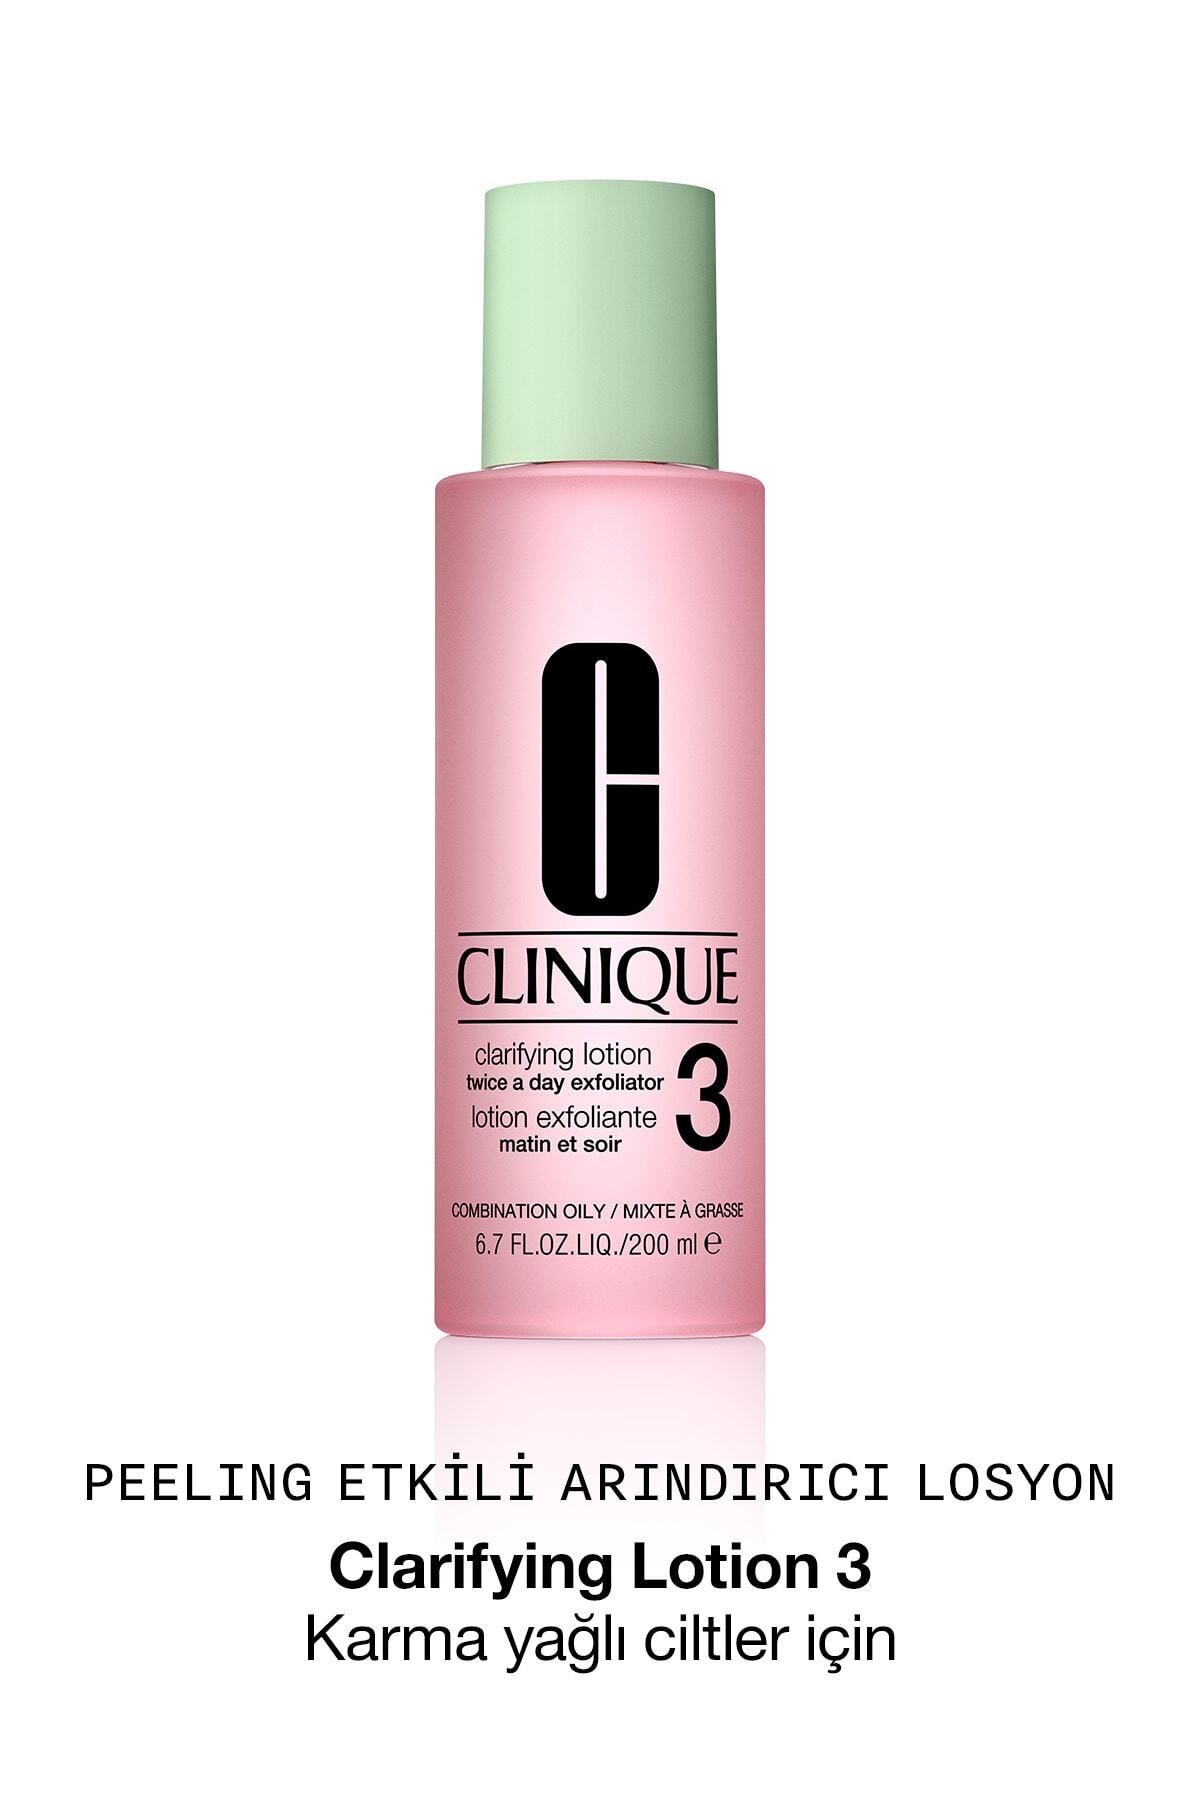 Clinique Clarifying Lotion Purifying Lotion Tonic 3 DKÜRN660